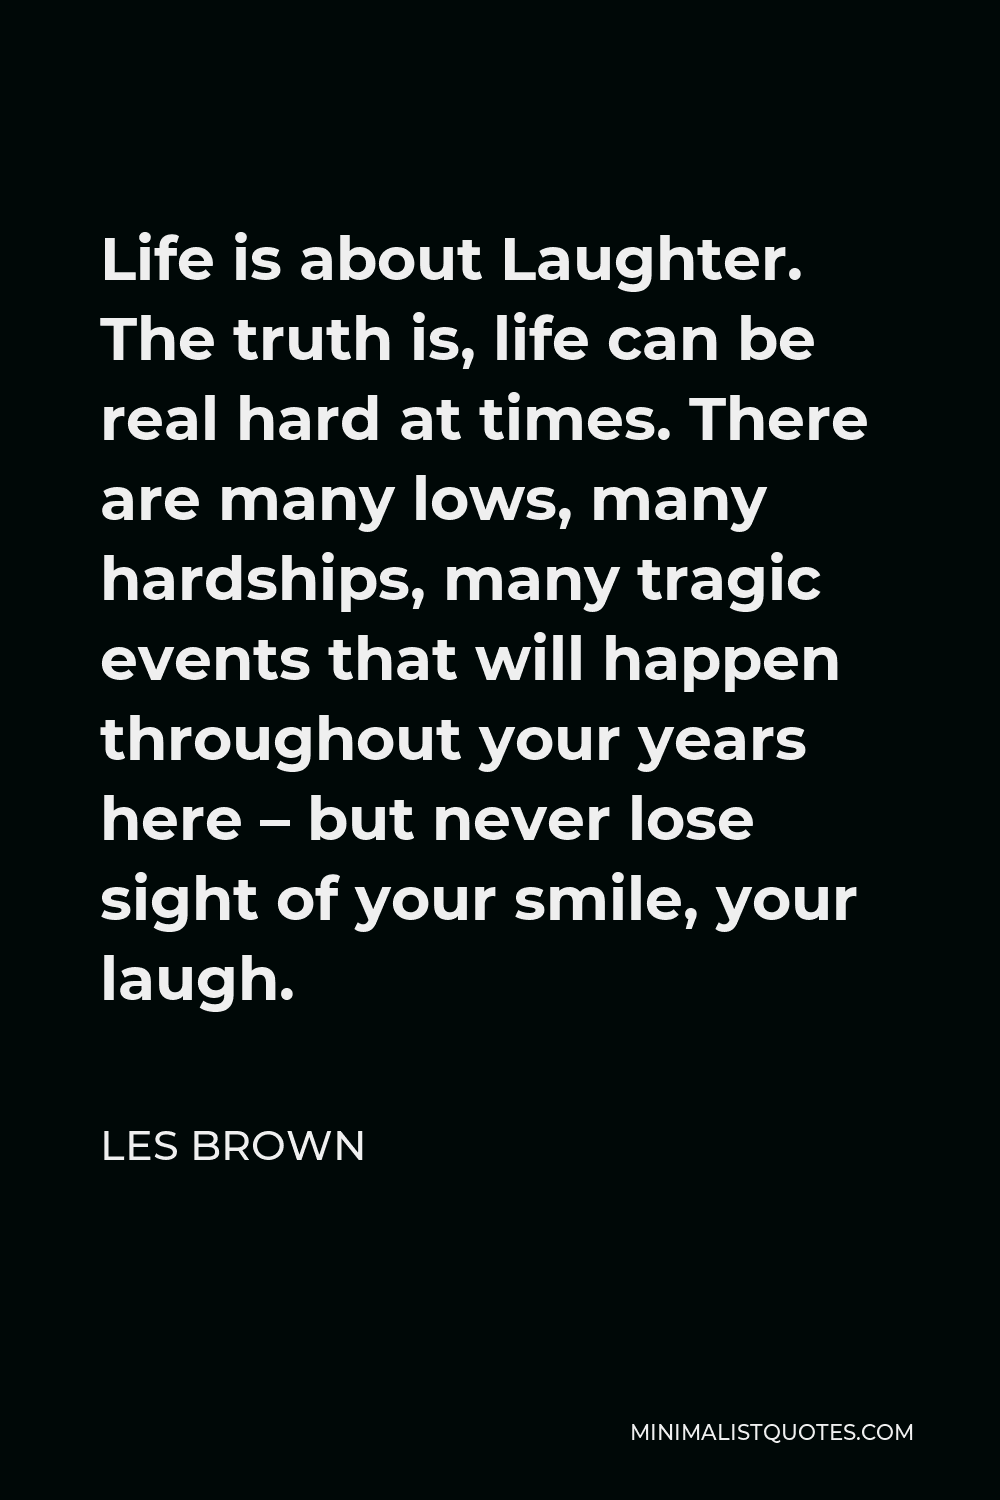 Les Brown Quote - Life is about Laughter. The truth is, life can be real hard at times. There are many lows, many hardships, many tragic events that will happen throughout your years here – but never lose sight of your smile, your laugh.